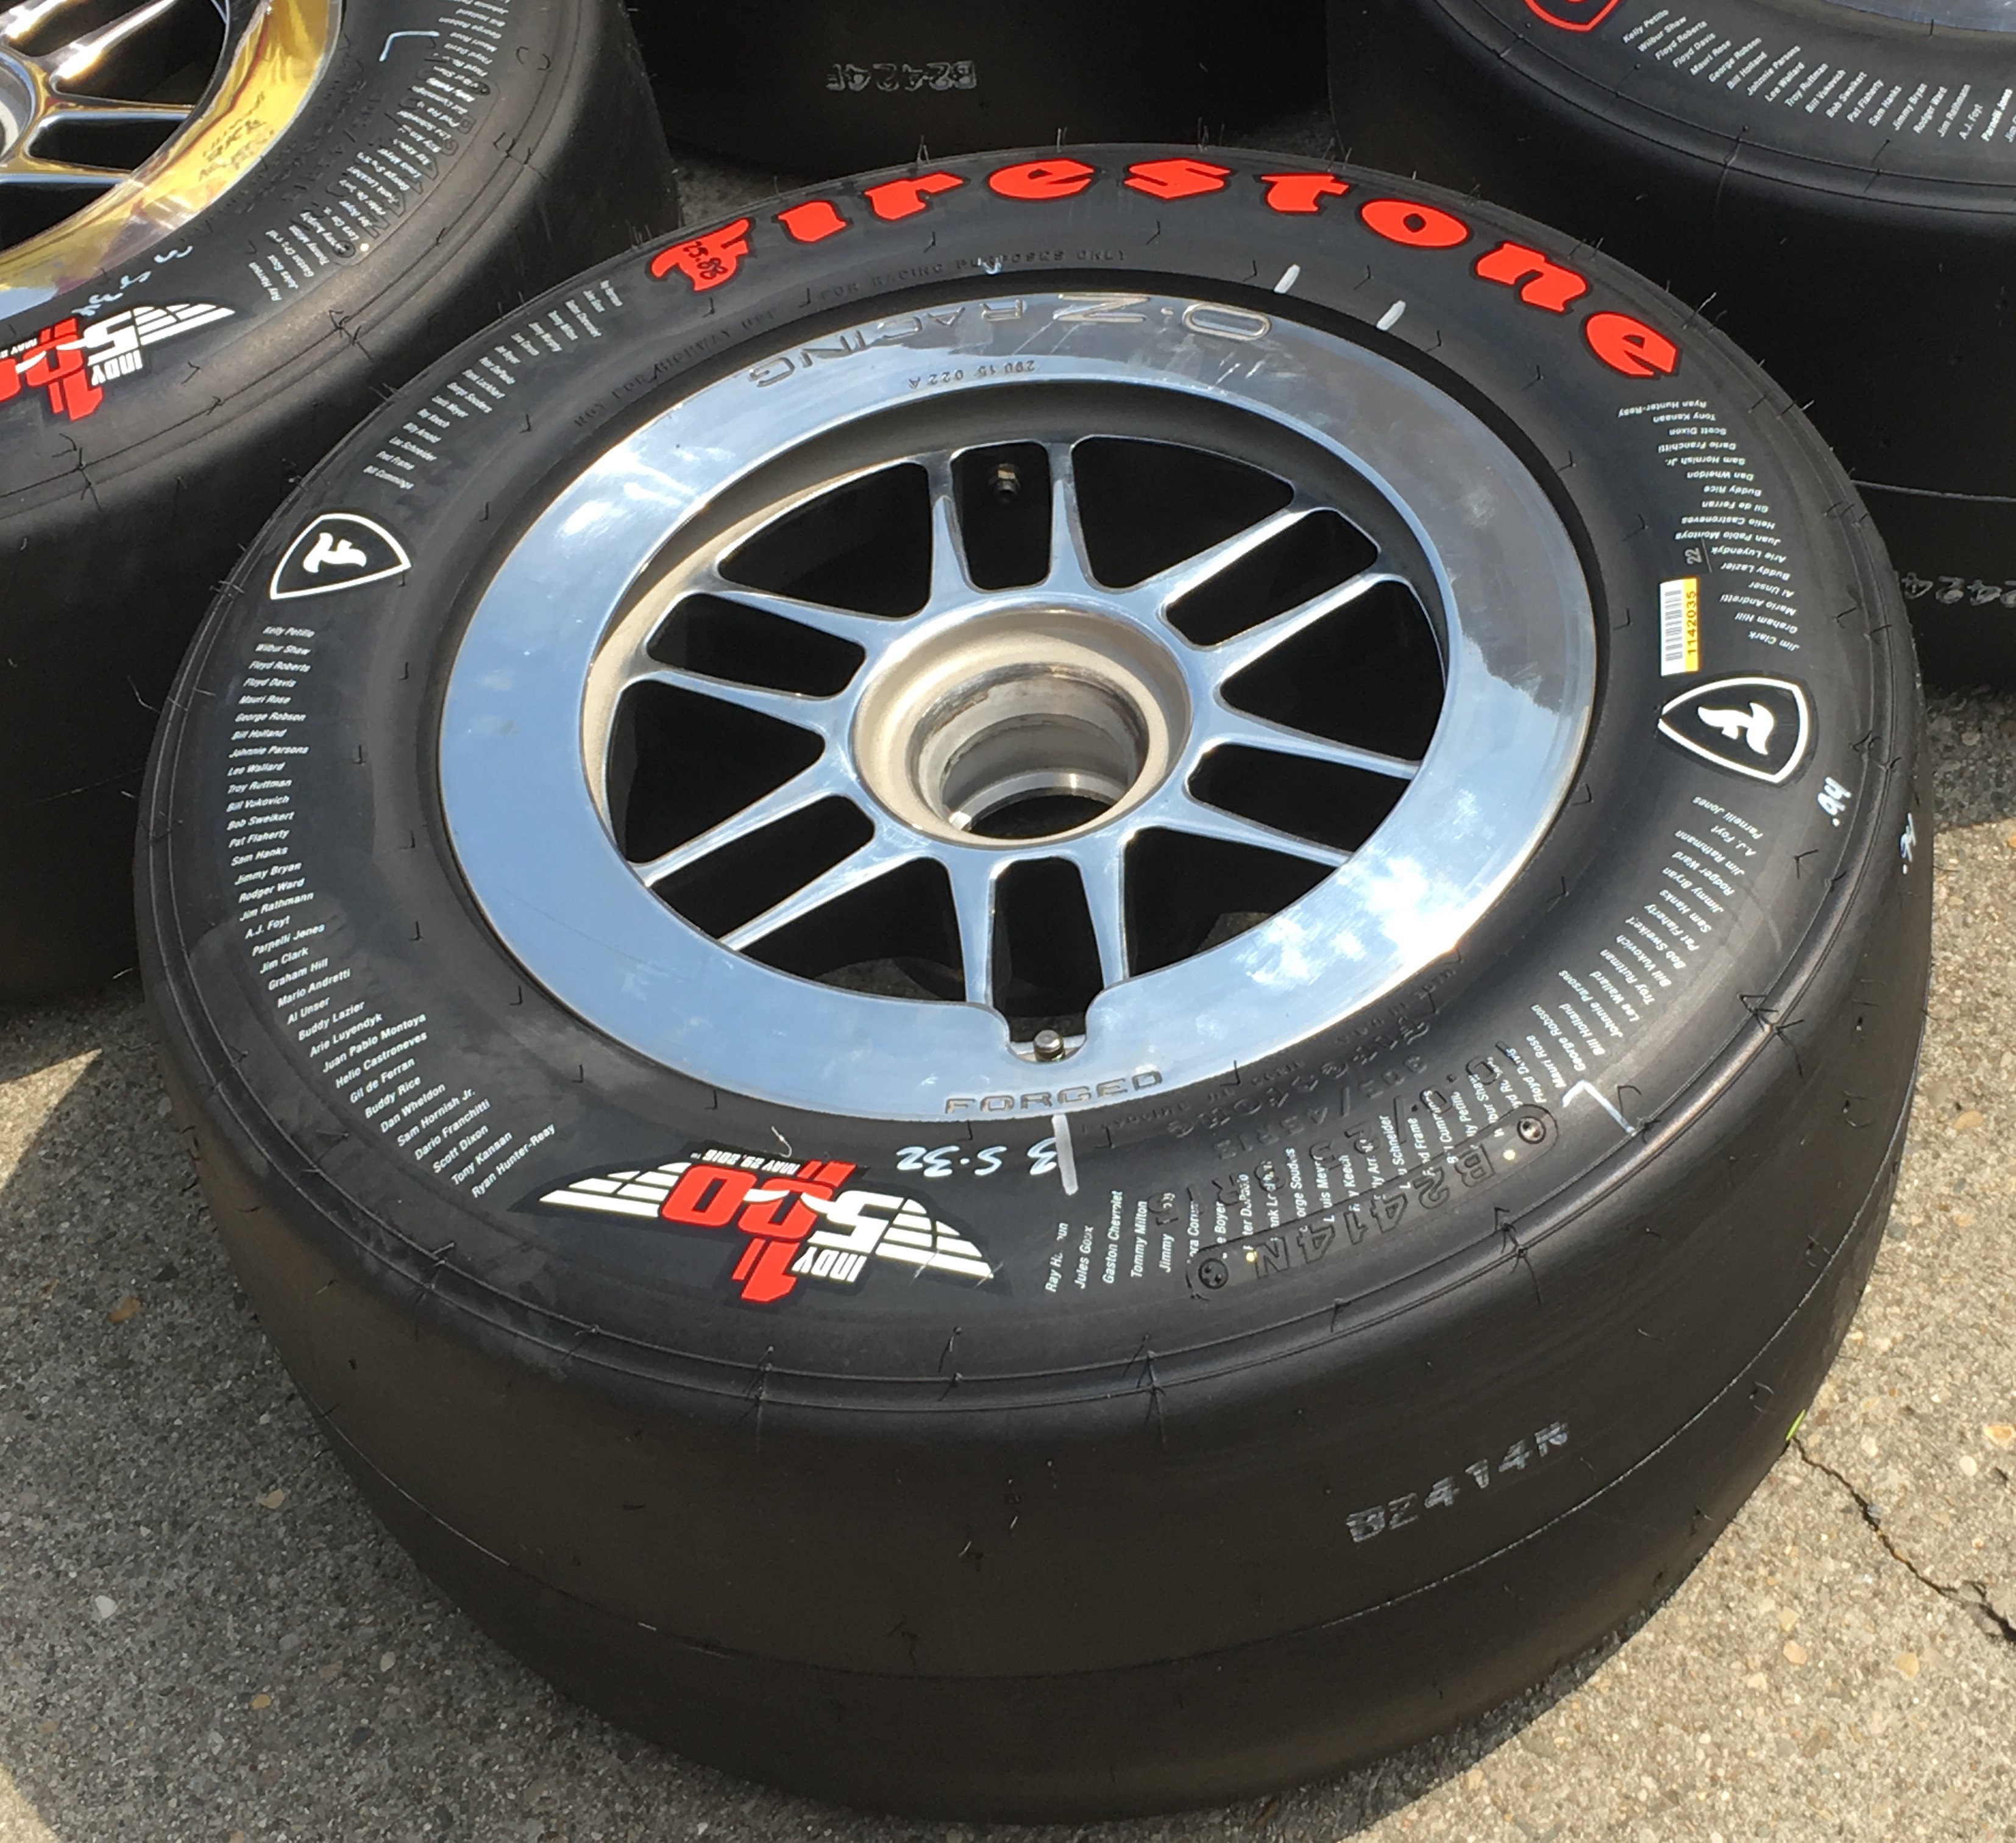 Indy 500 tires